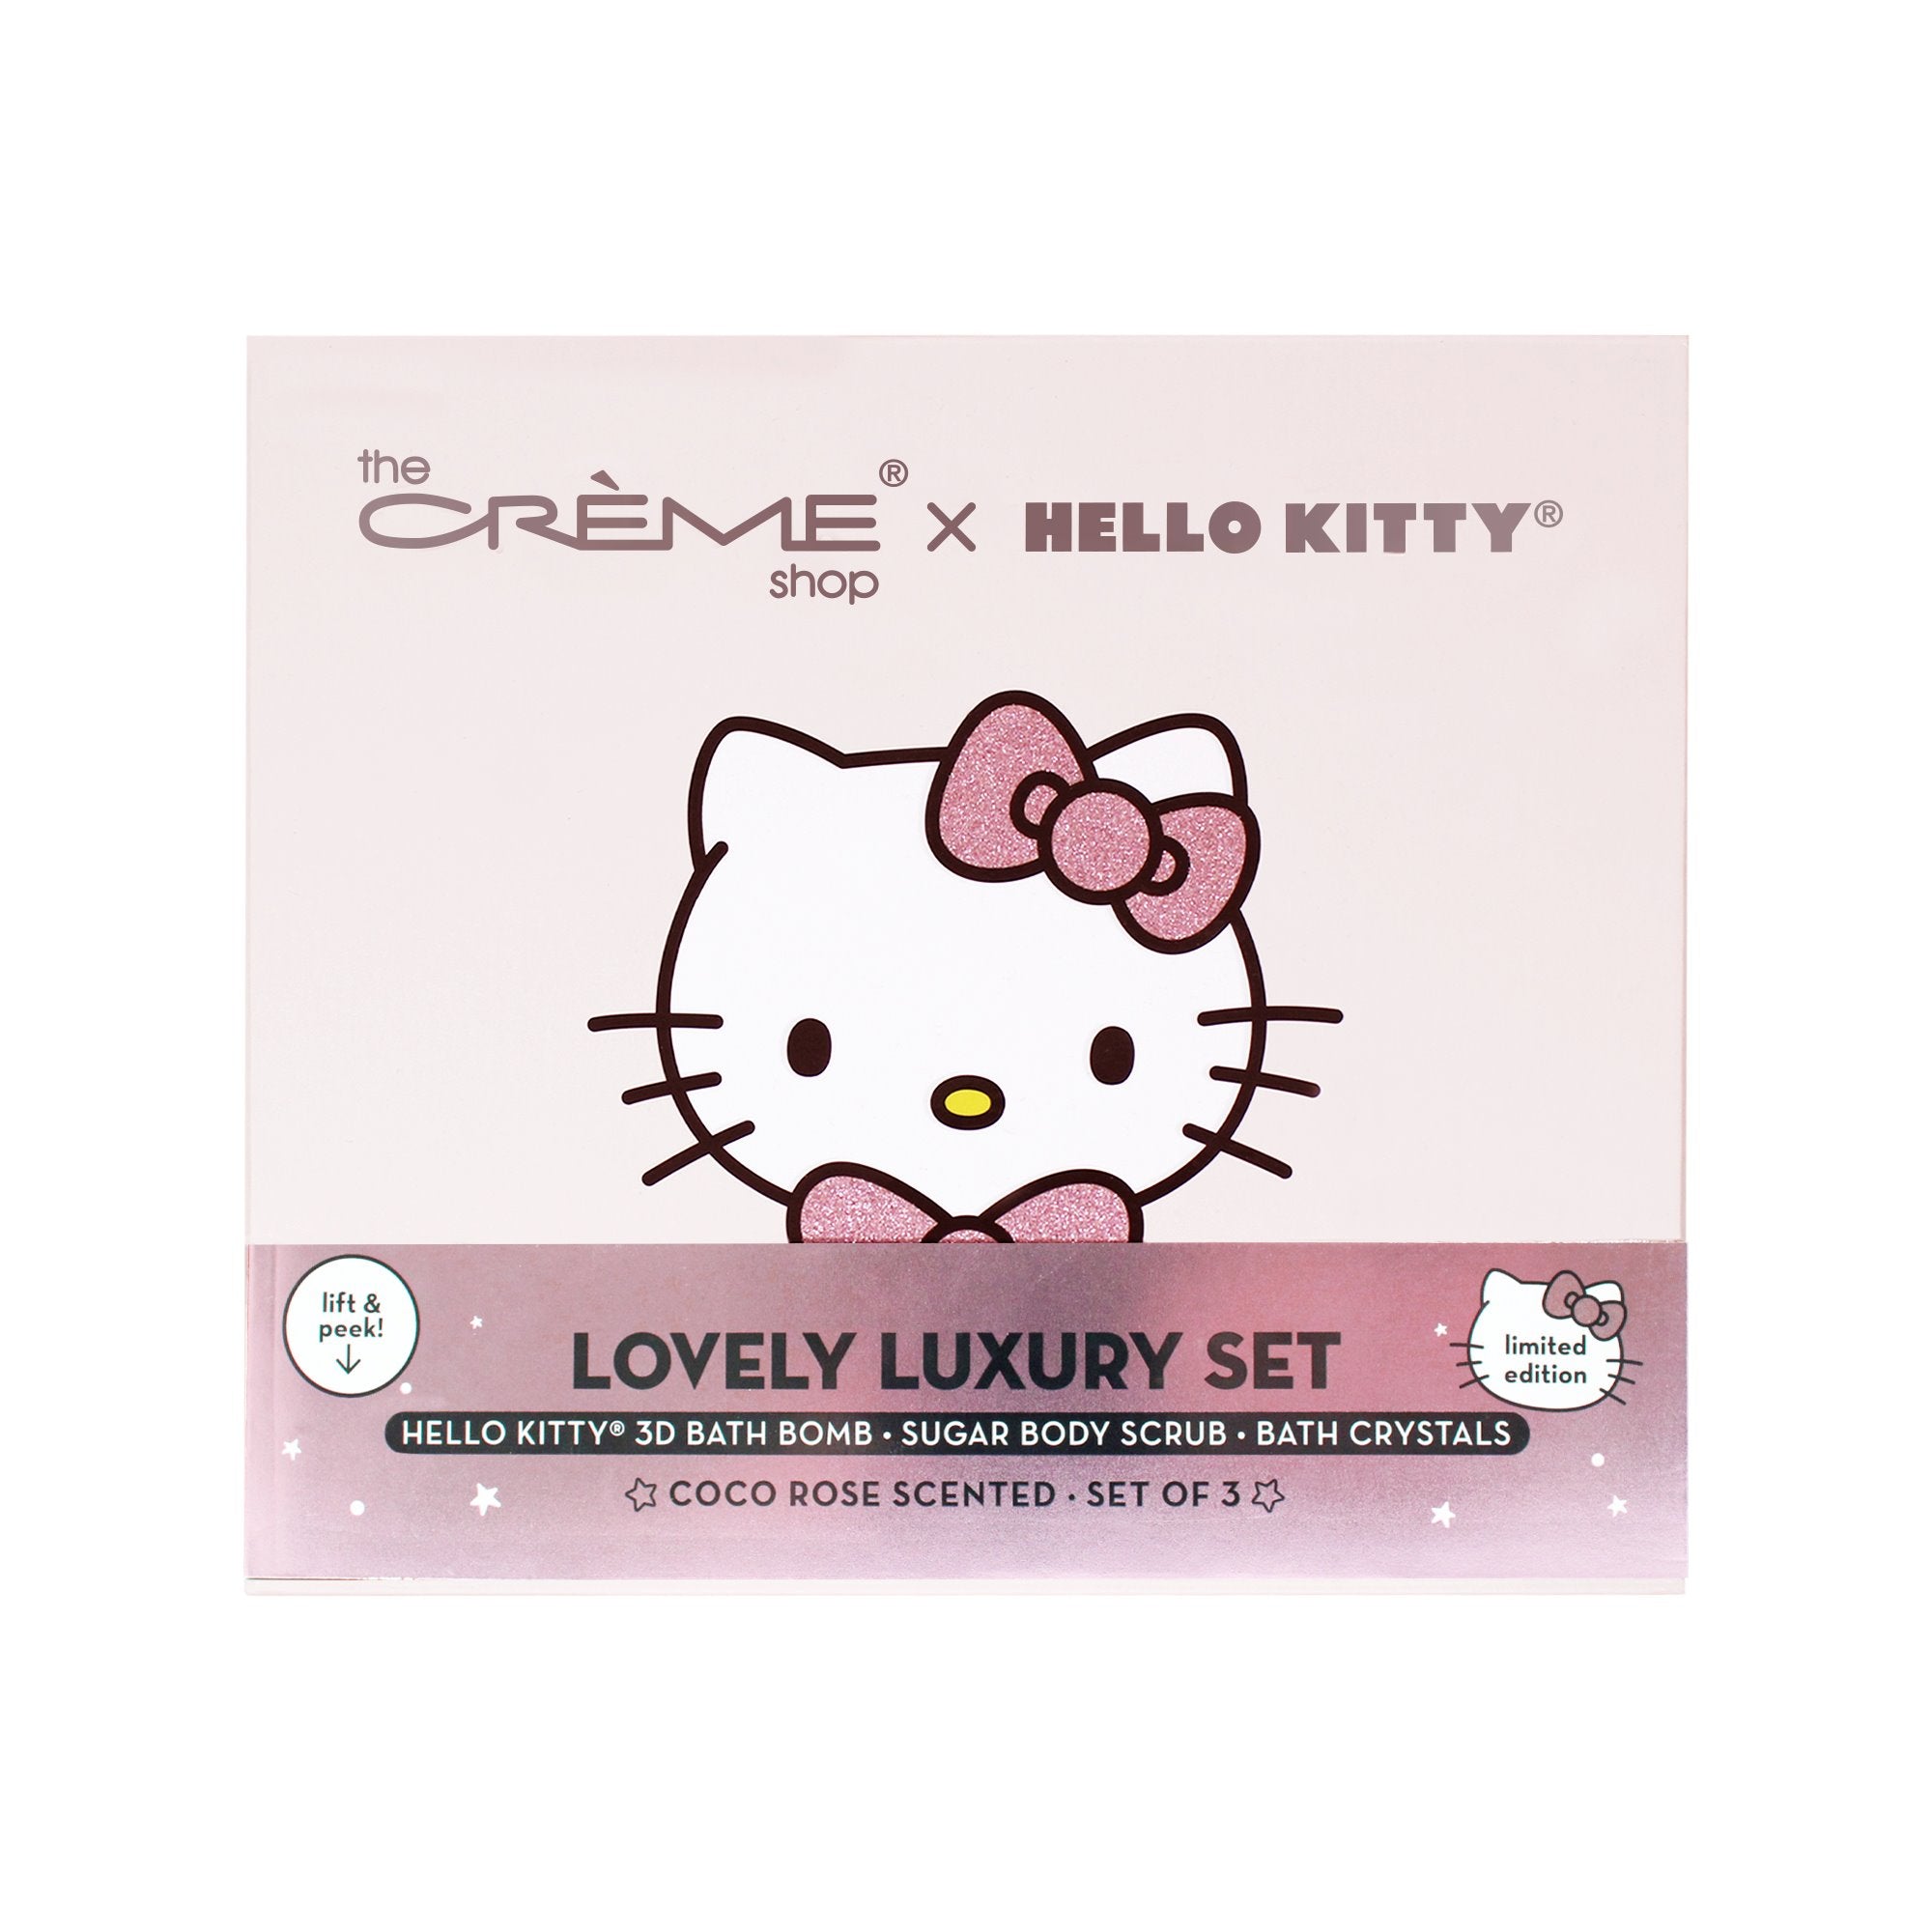 The Crème Shop x Hello Kitty – Lovely Luxury Spa Set The Crème Shop x Sanrio Coco Rose Scented 